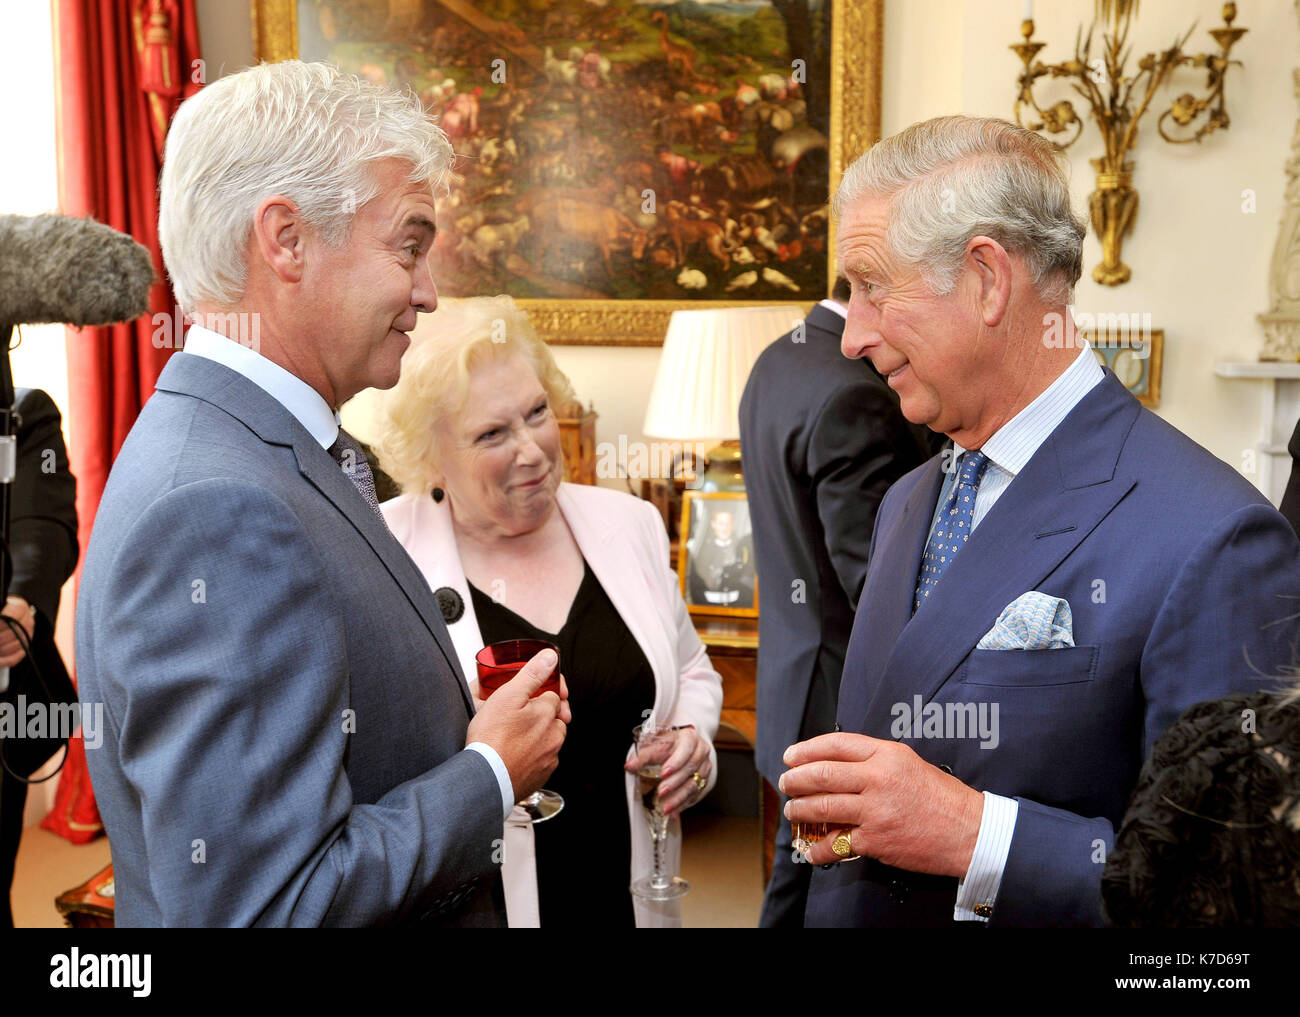 Photo Must Be Credited ©Alpha Press 073074 18/09/12 Prince Charles The Prince of Wales talks to TV presenter Phillip Schofield and Denise Robertson during a reception for celebrities and volunteers of the Diamond Champions volunteers organised by the Women's Royal Voluntary Service (WRVS), at Clarence House in central London Stock Photo